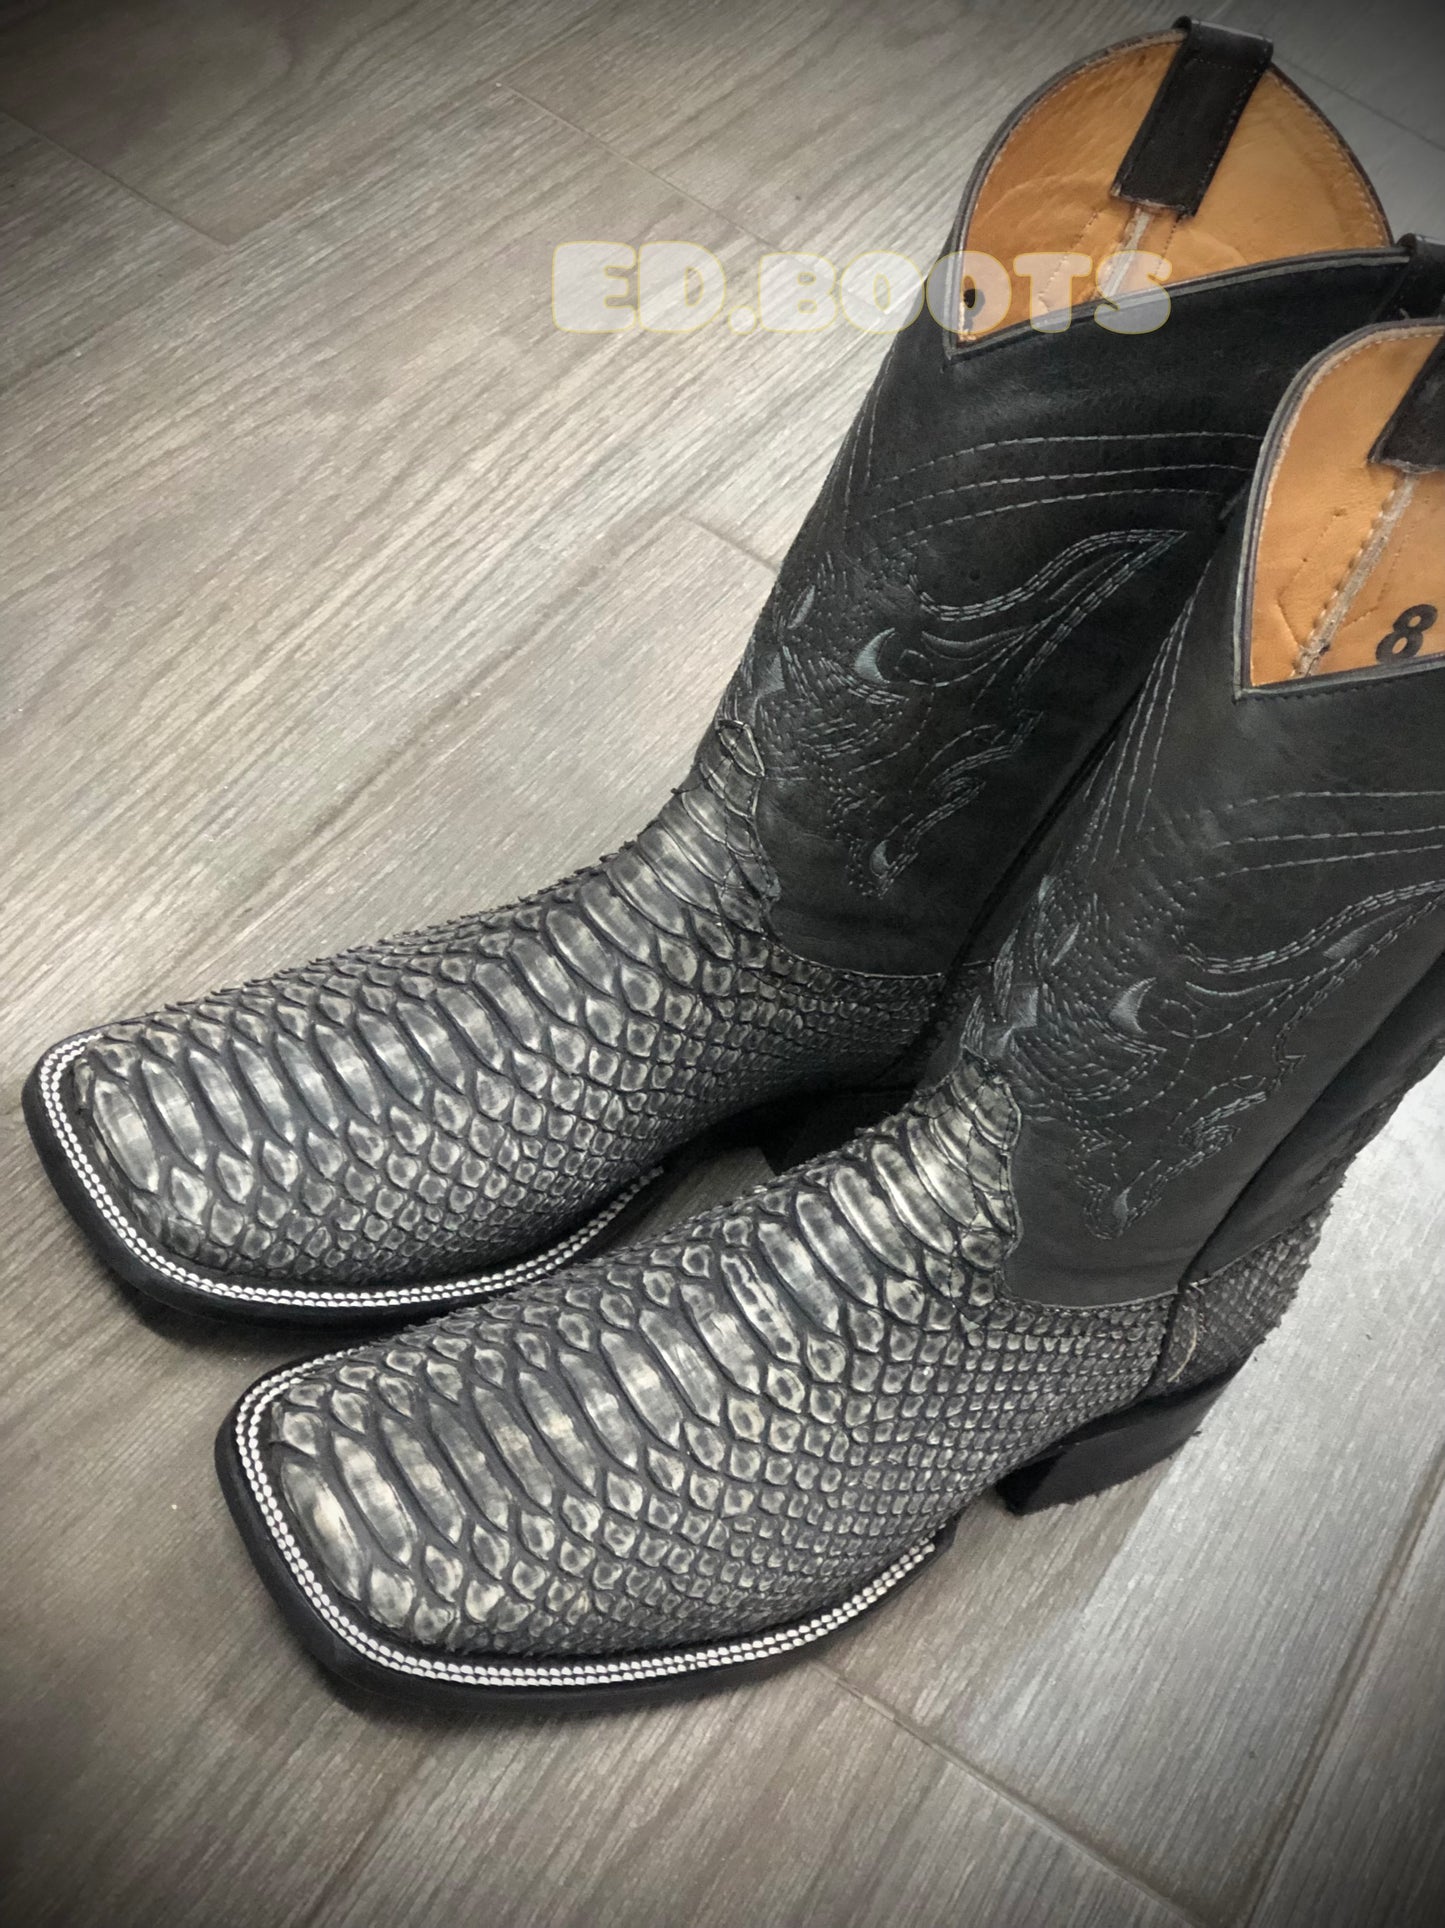 Men’s Newsletter gray by ED.boots